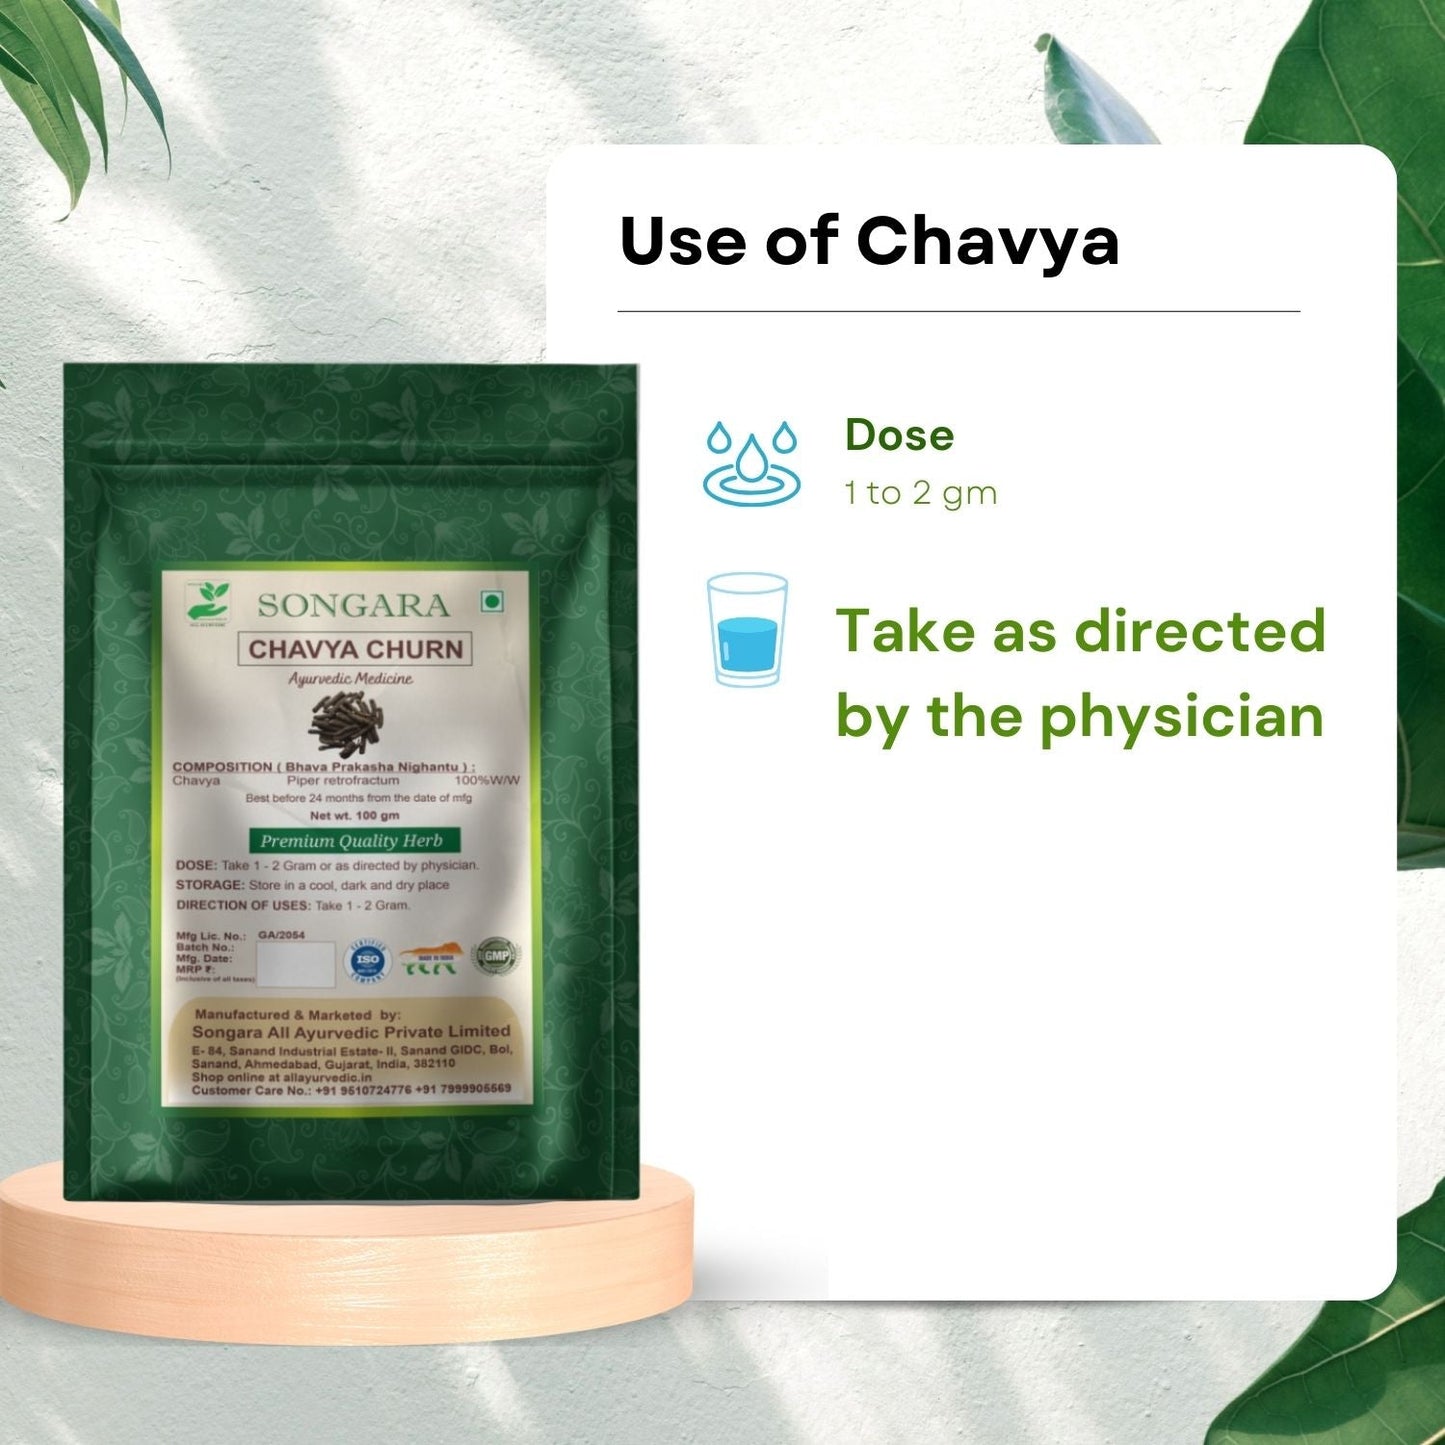 Songara Chavya Powder - (Piper retrofractum) Relieves constipation, abdominal pain, improves digestive strength and worm infestation. 100gm ( 1 Unit ) - Songara All Ayurvedic